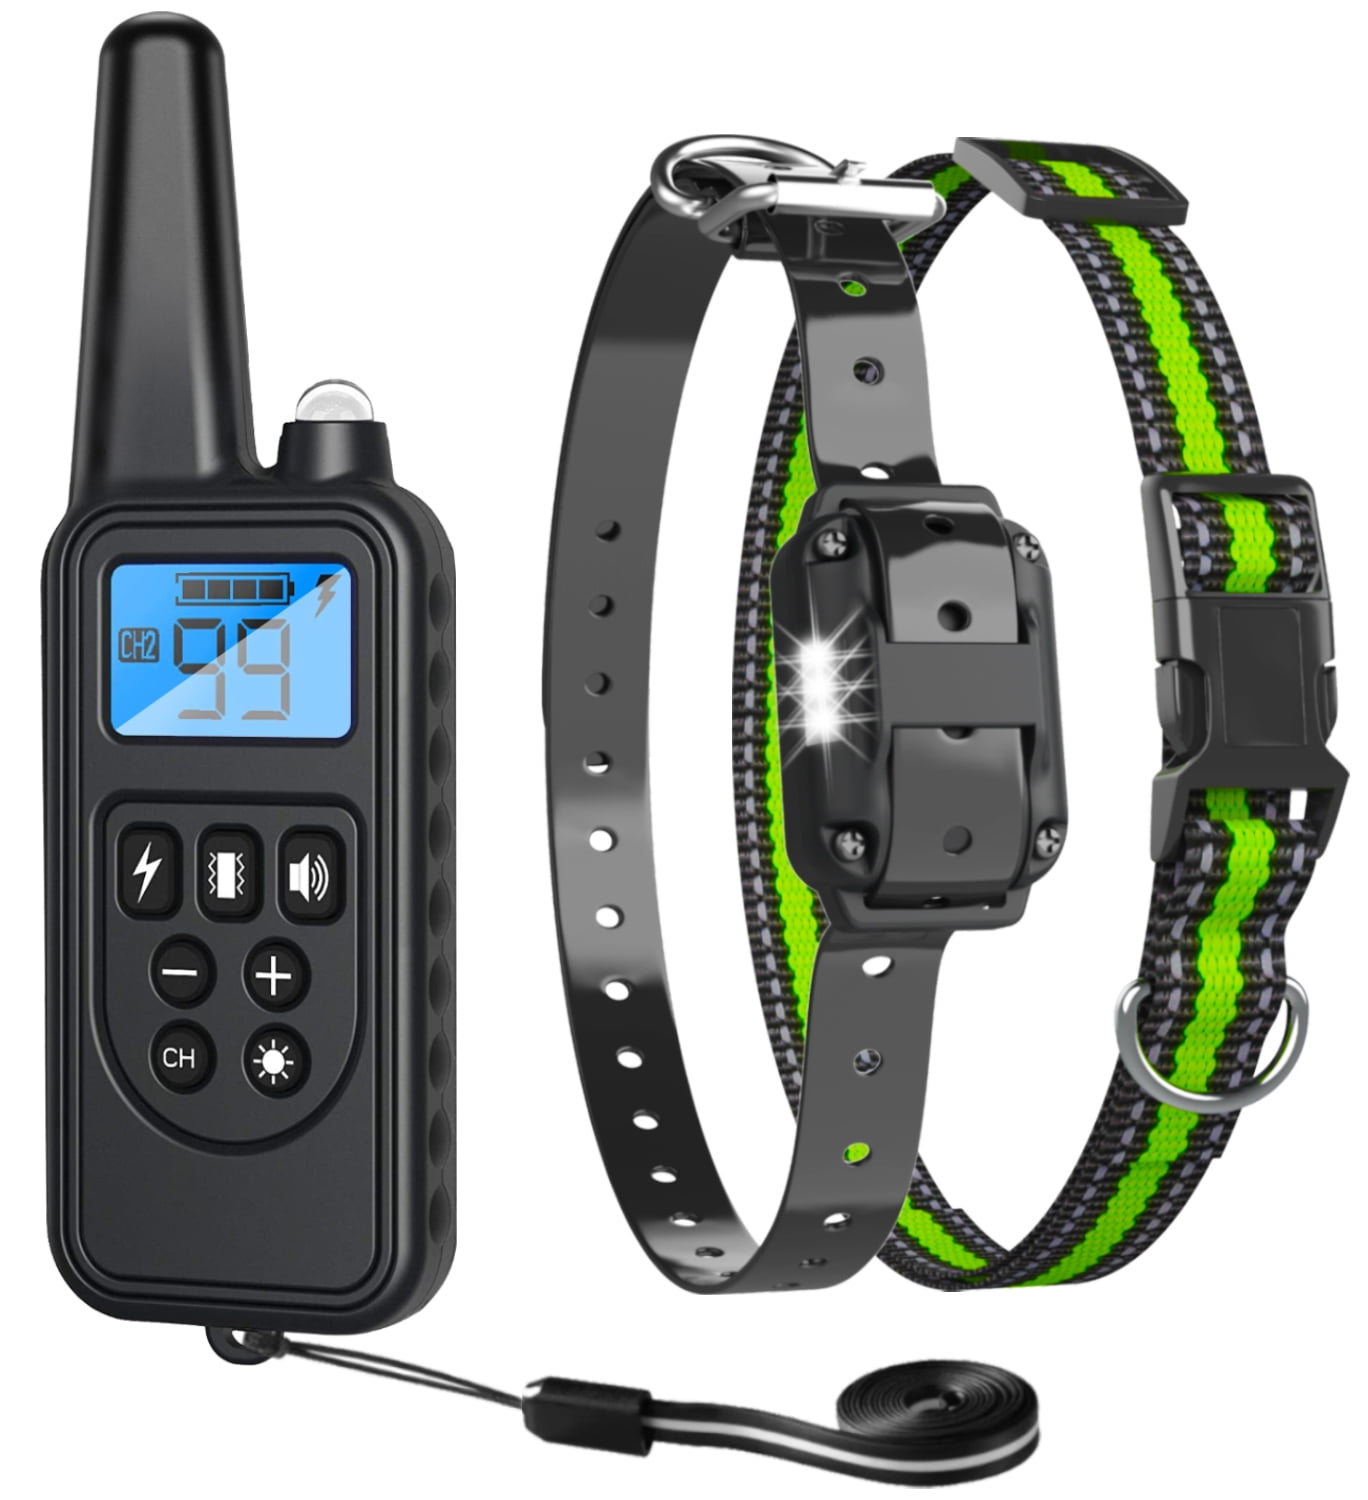 Dog Training Collar with Remote 3 Correction Modes Beep Vibration Waterproof Dog E Collar for Dogs Large,Medium,Small Rechargeable Training Collar Up to 1800ft Remote Range Training Collar for Dogs 